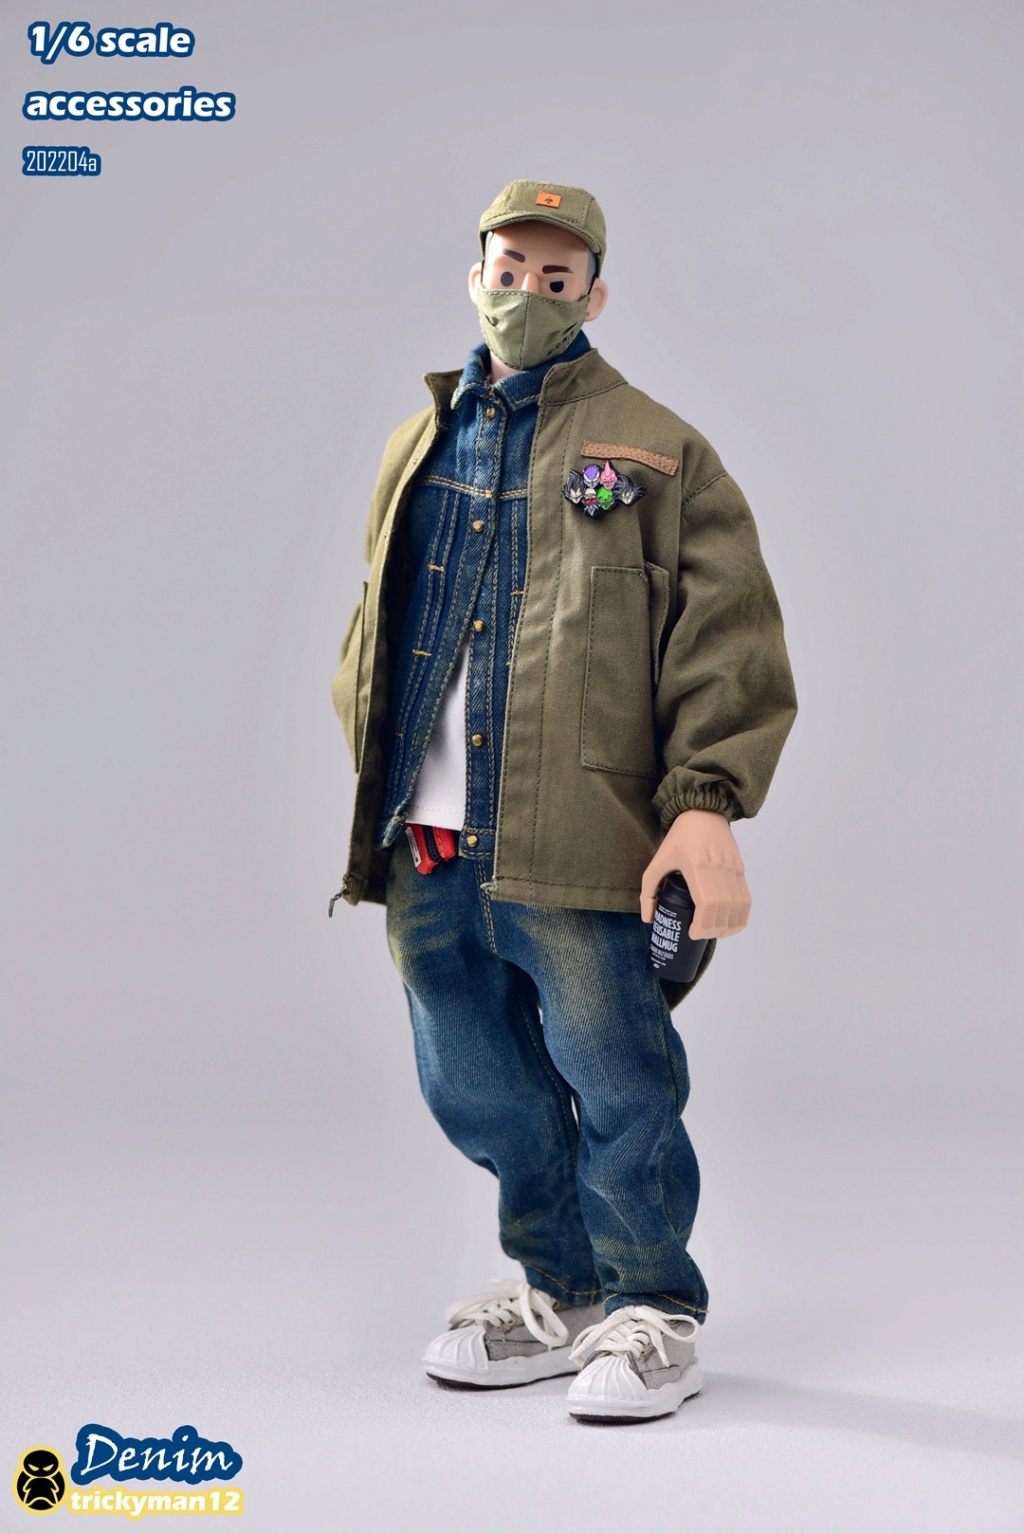 accessory - NEW PRODUCT: Trickyman12: 1/6 Denim Clothing Set [A/B Style] 17522711